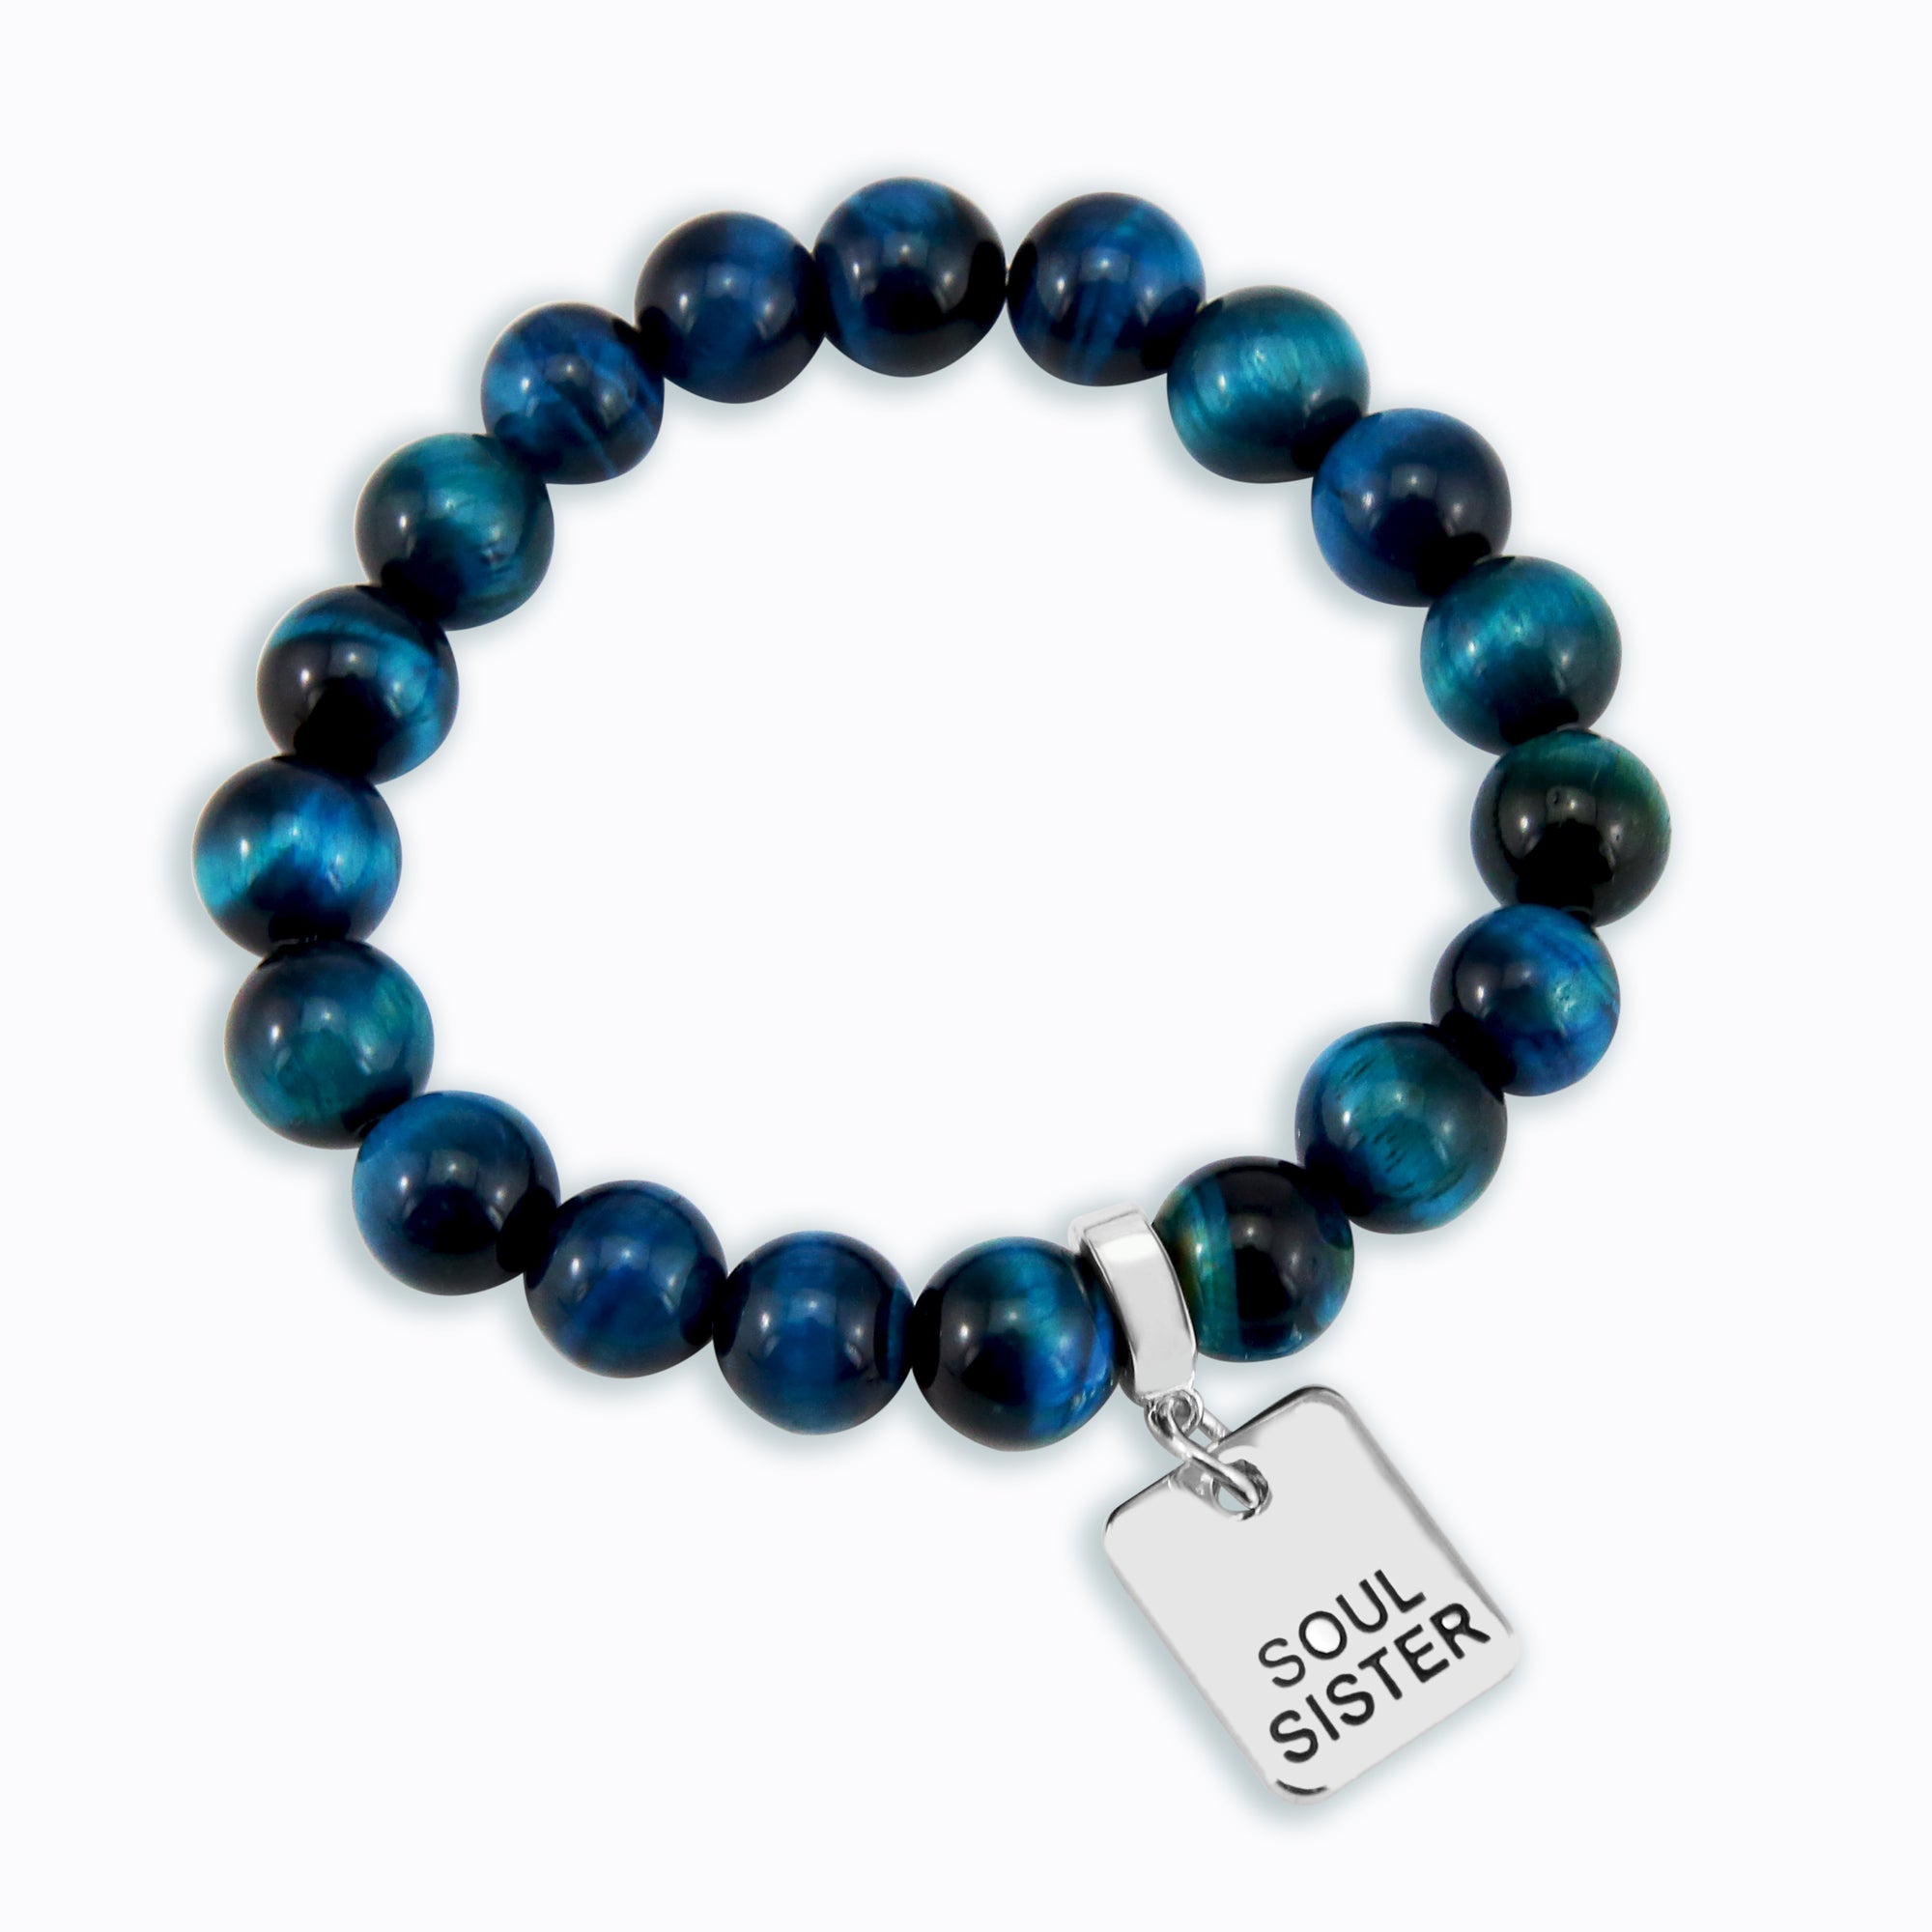 Precious Stone Bracelet - Teal Tigers Eye 10mm Beads - with Silver Word Charms